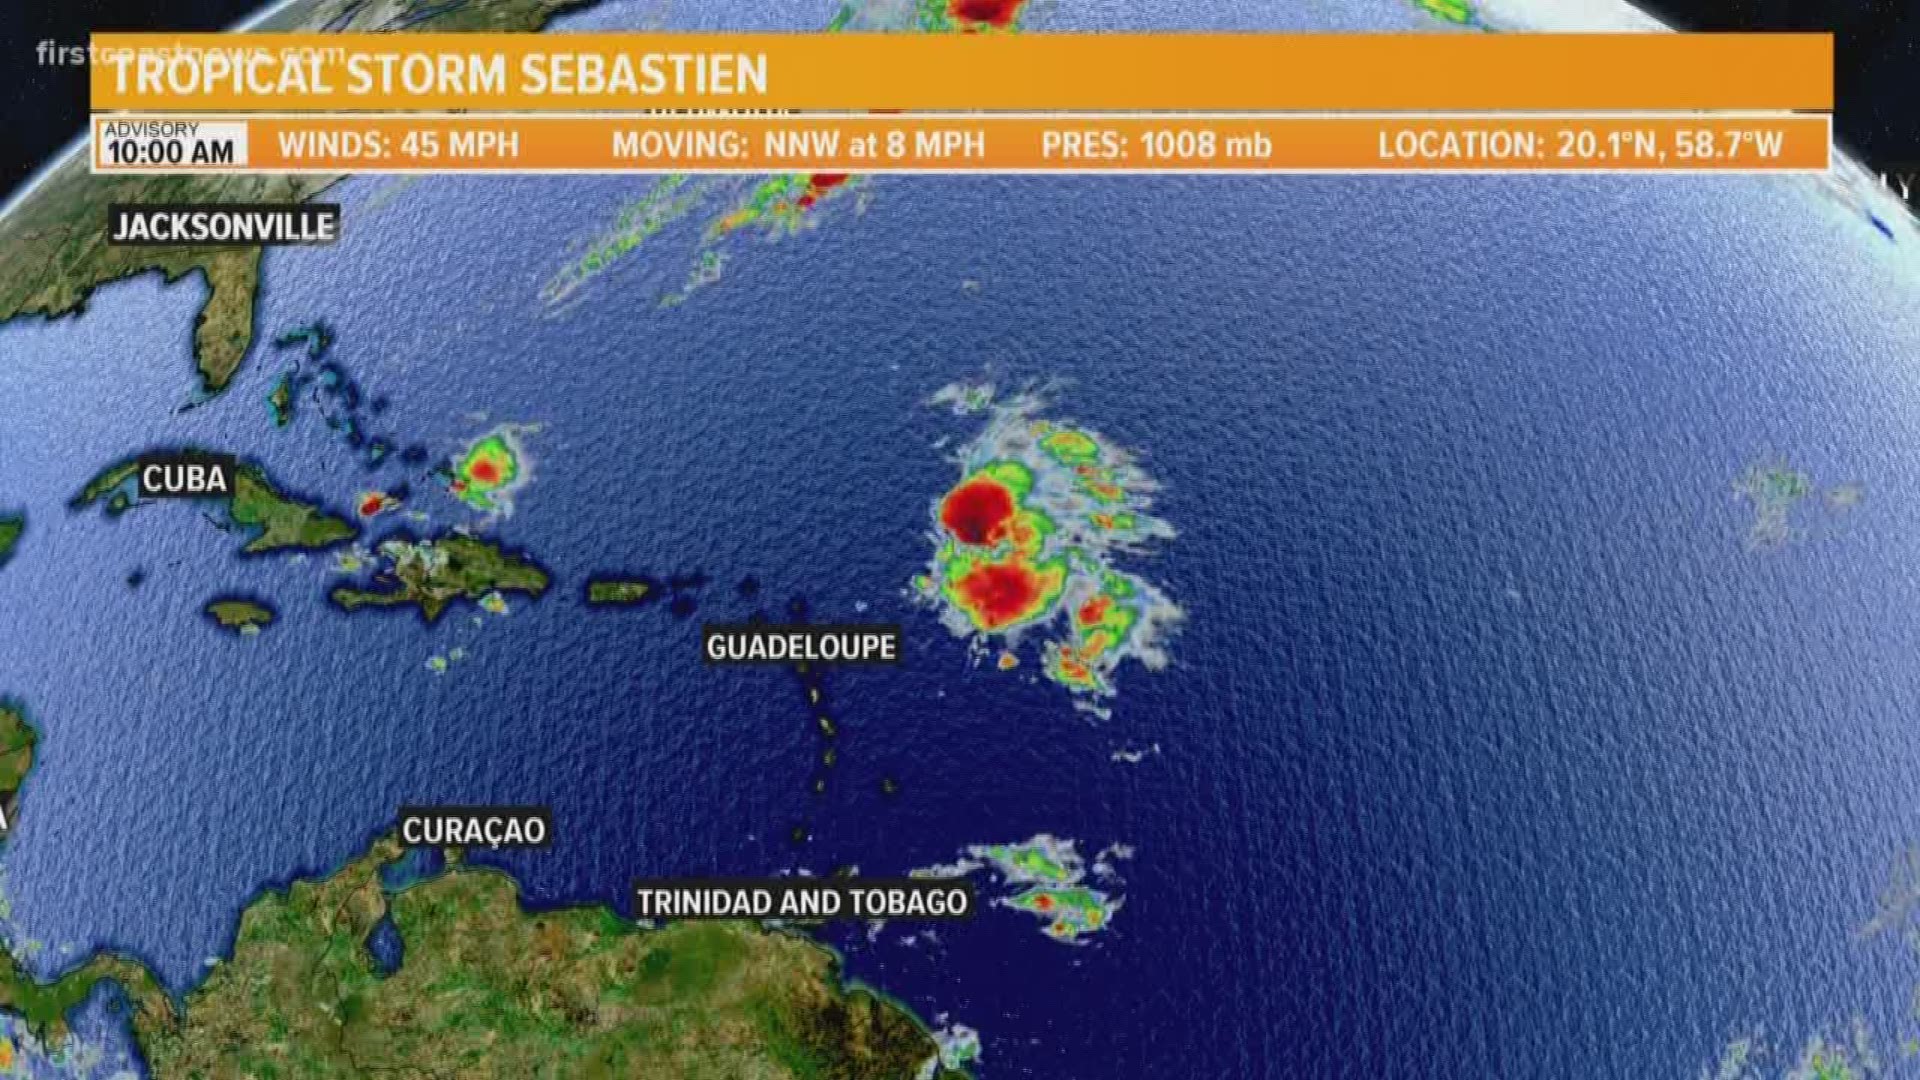 Sebastien poses no threat to us at home. It is the latest tropical storm to form in a hurricane season since 2013.